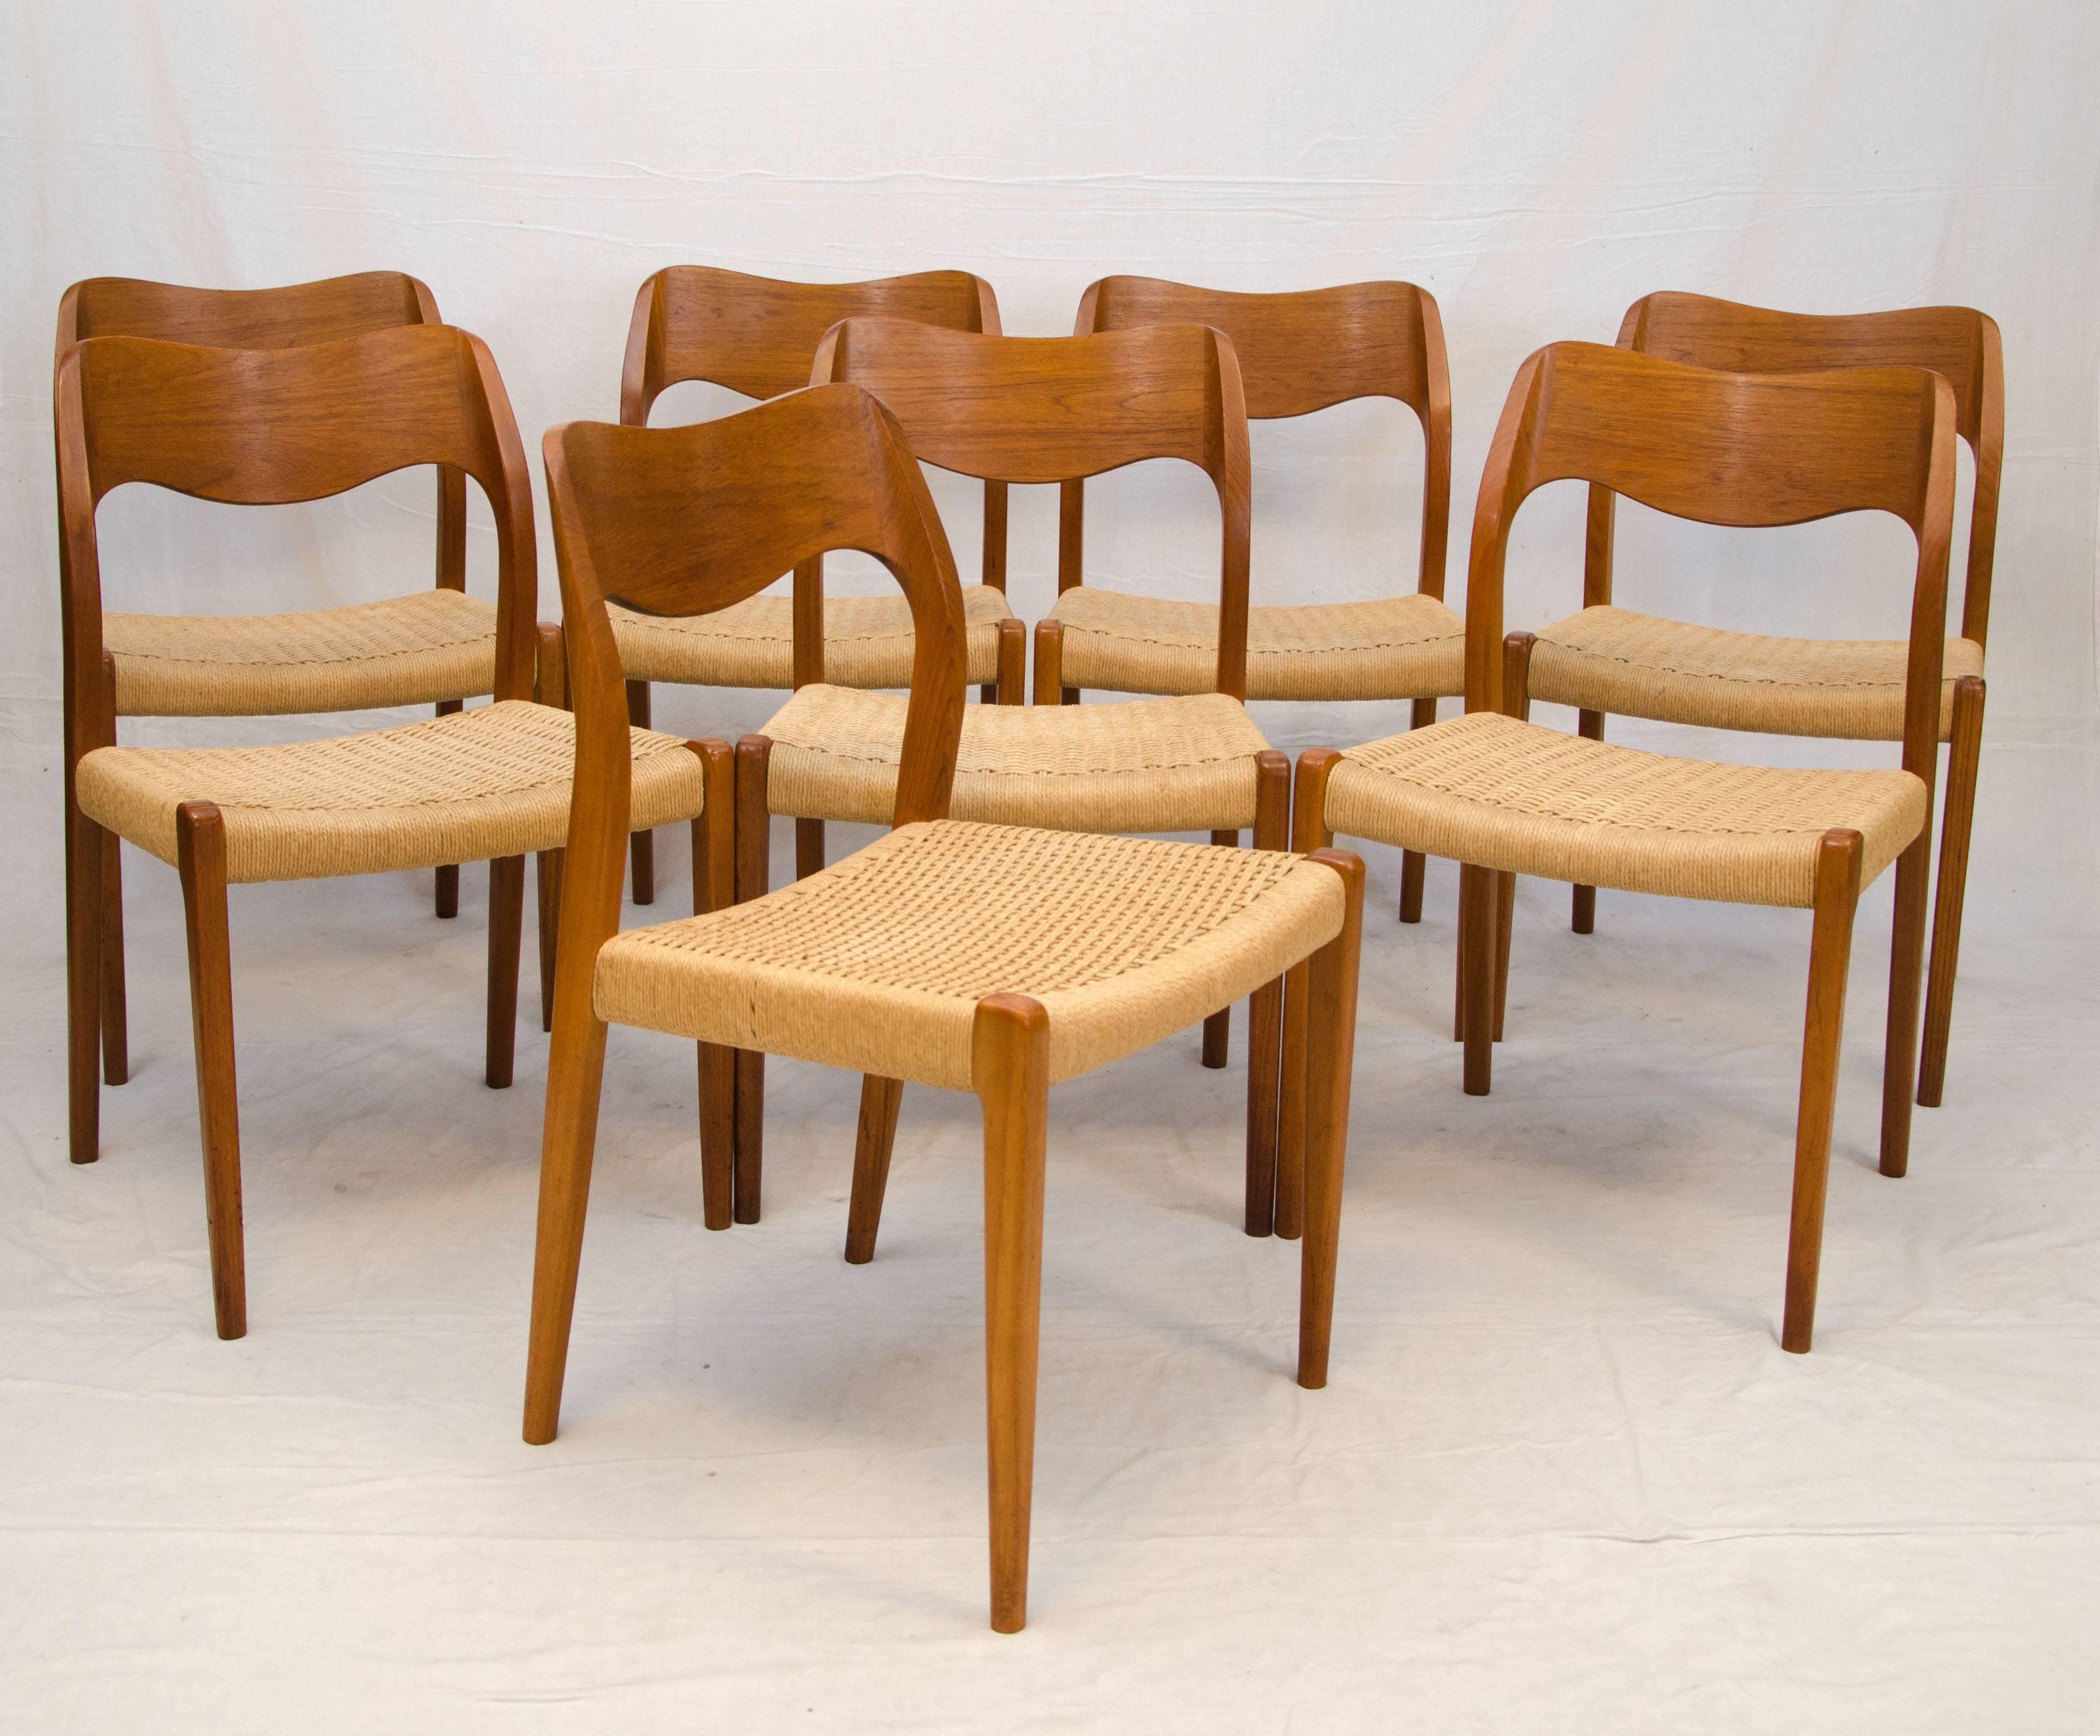 Set of iconic Møller model 71 Danish teak dining chairs with clean original Danish cord seats and comfortable sculpted backs.